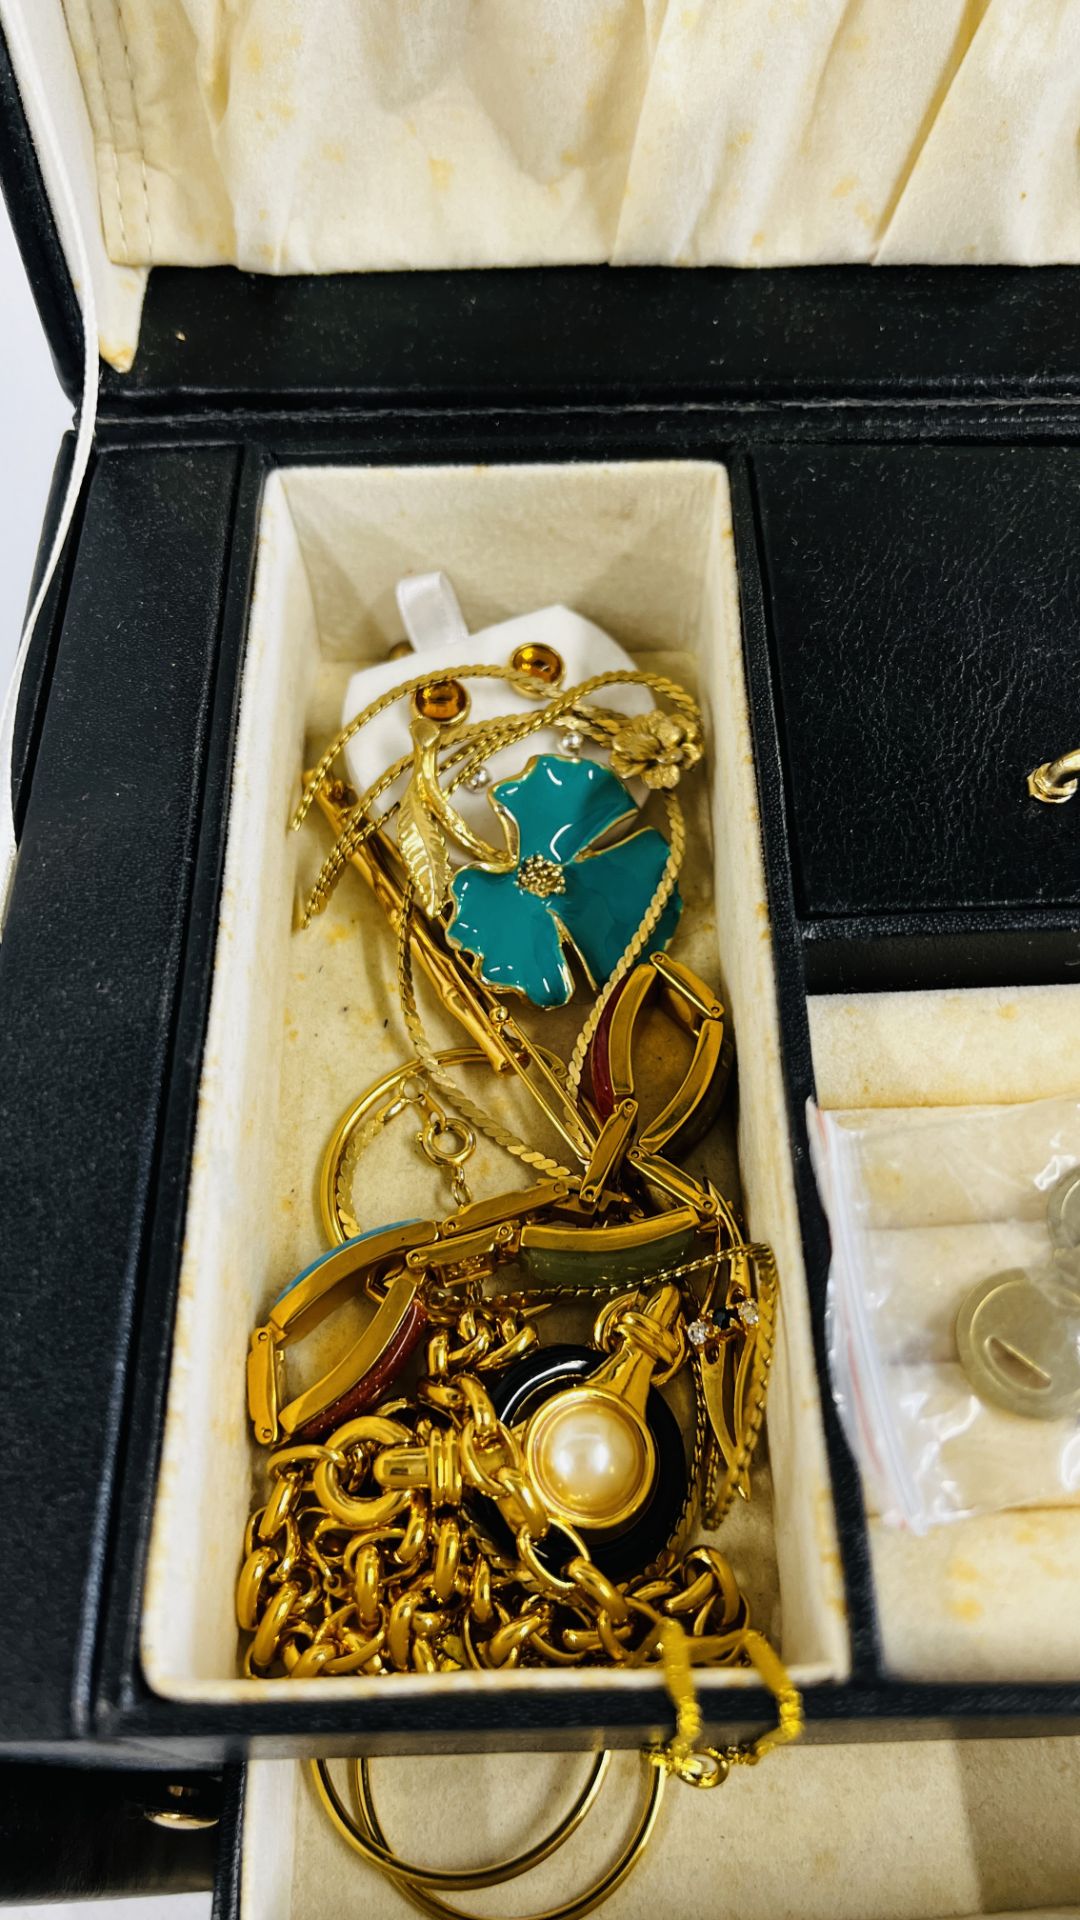 A SELECTION OF COSTUME JEWELLERY IN A LARGE BLACK JEWELLERY BOX. - Image 3 of 10